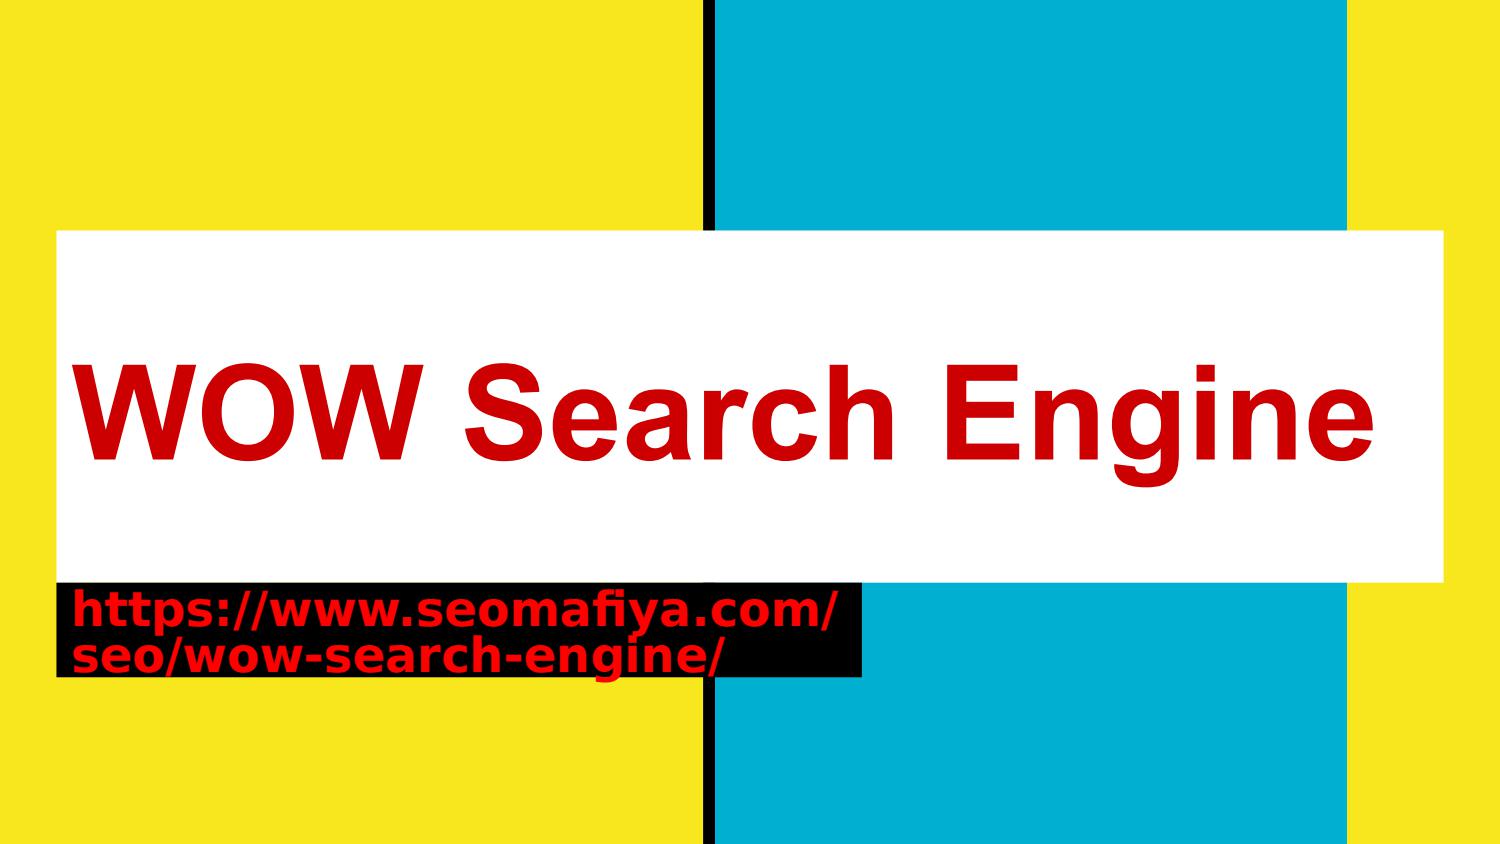 A Complete Guide about WOW Search Engine